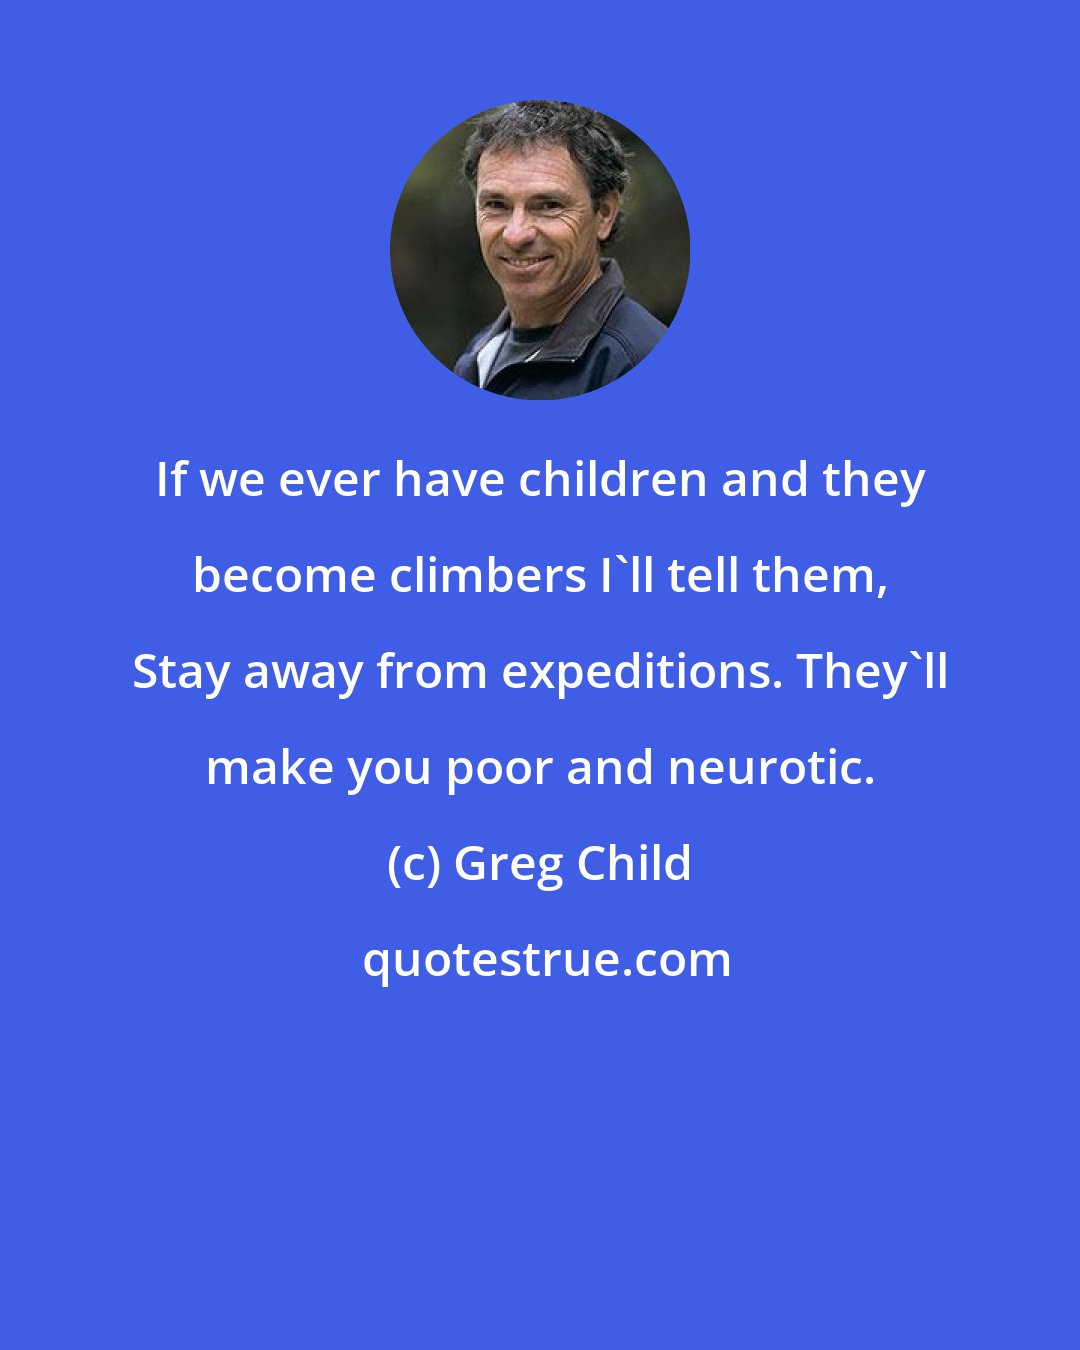 Greg Child: If we ever have children and they become climbers I'll tell them, Stay away from expeditions. They'll make you poor and neurotic.